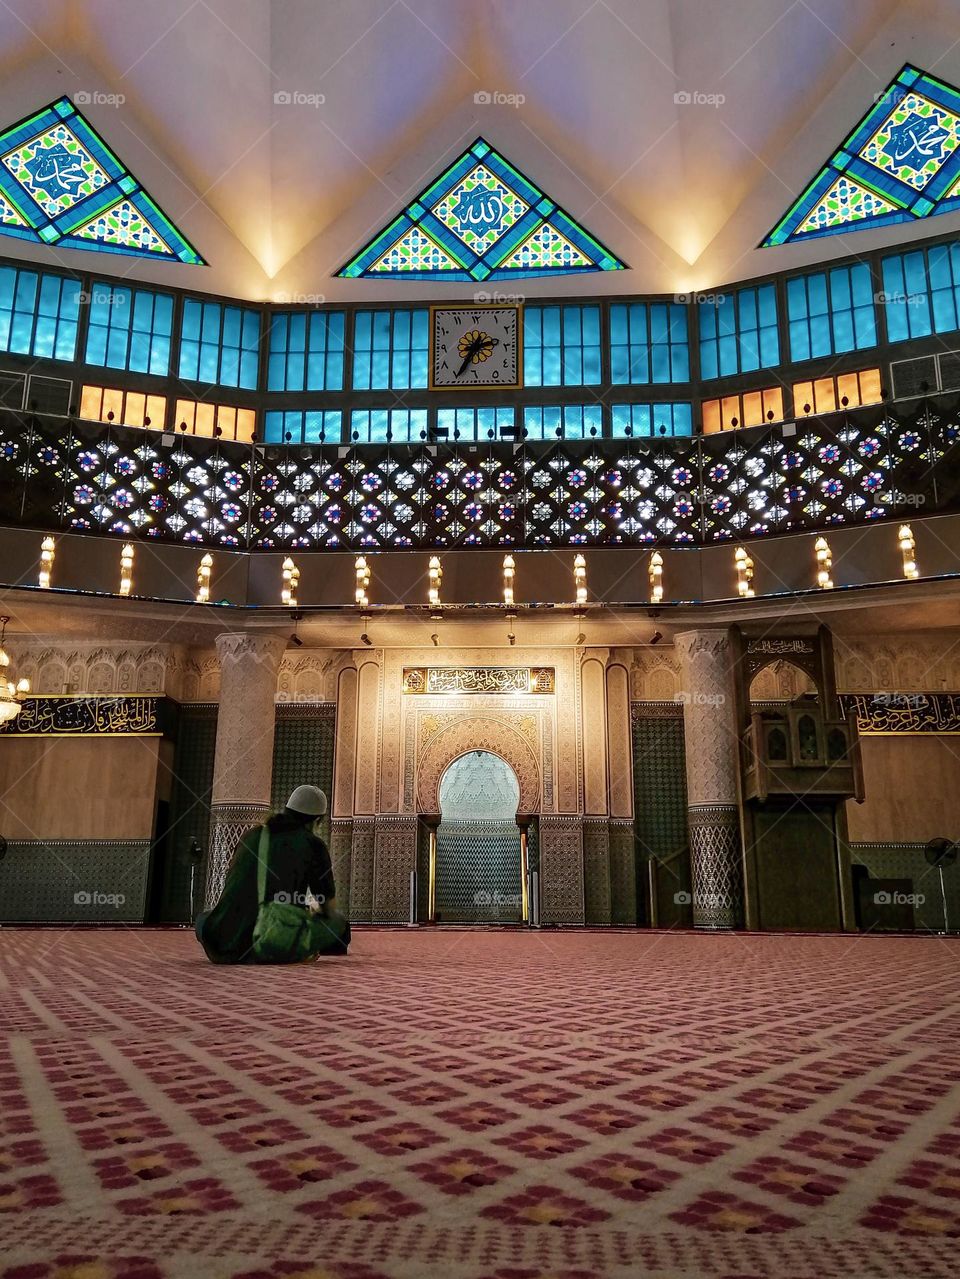 A man is sitting in the mosque after finishing the prayer in the month of Ramadan